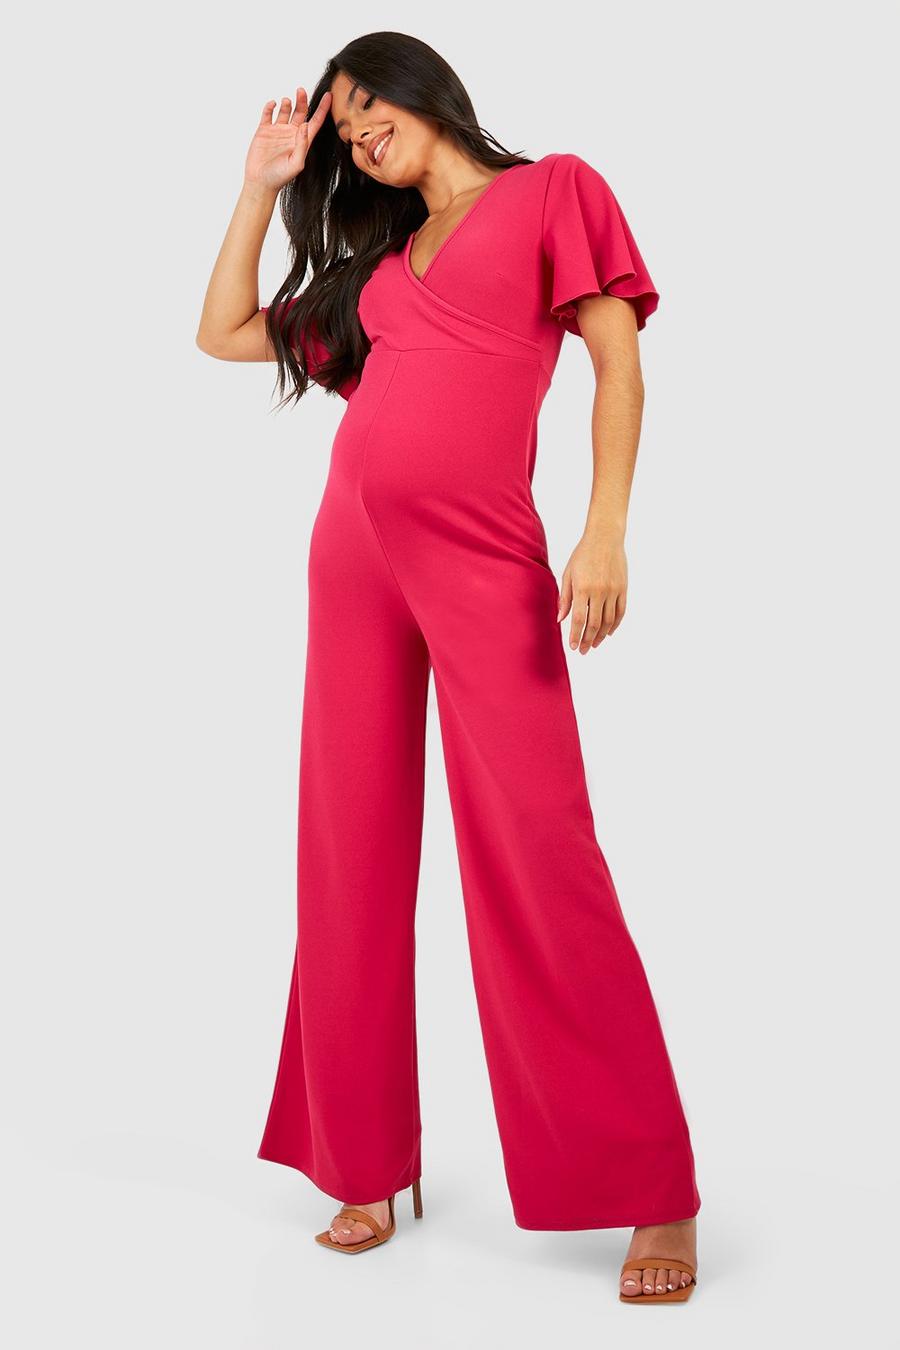 Hot pink Maternity Textured Tie Front Playsuit